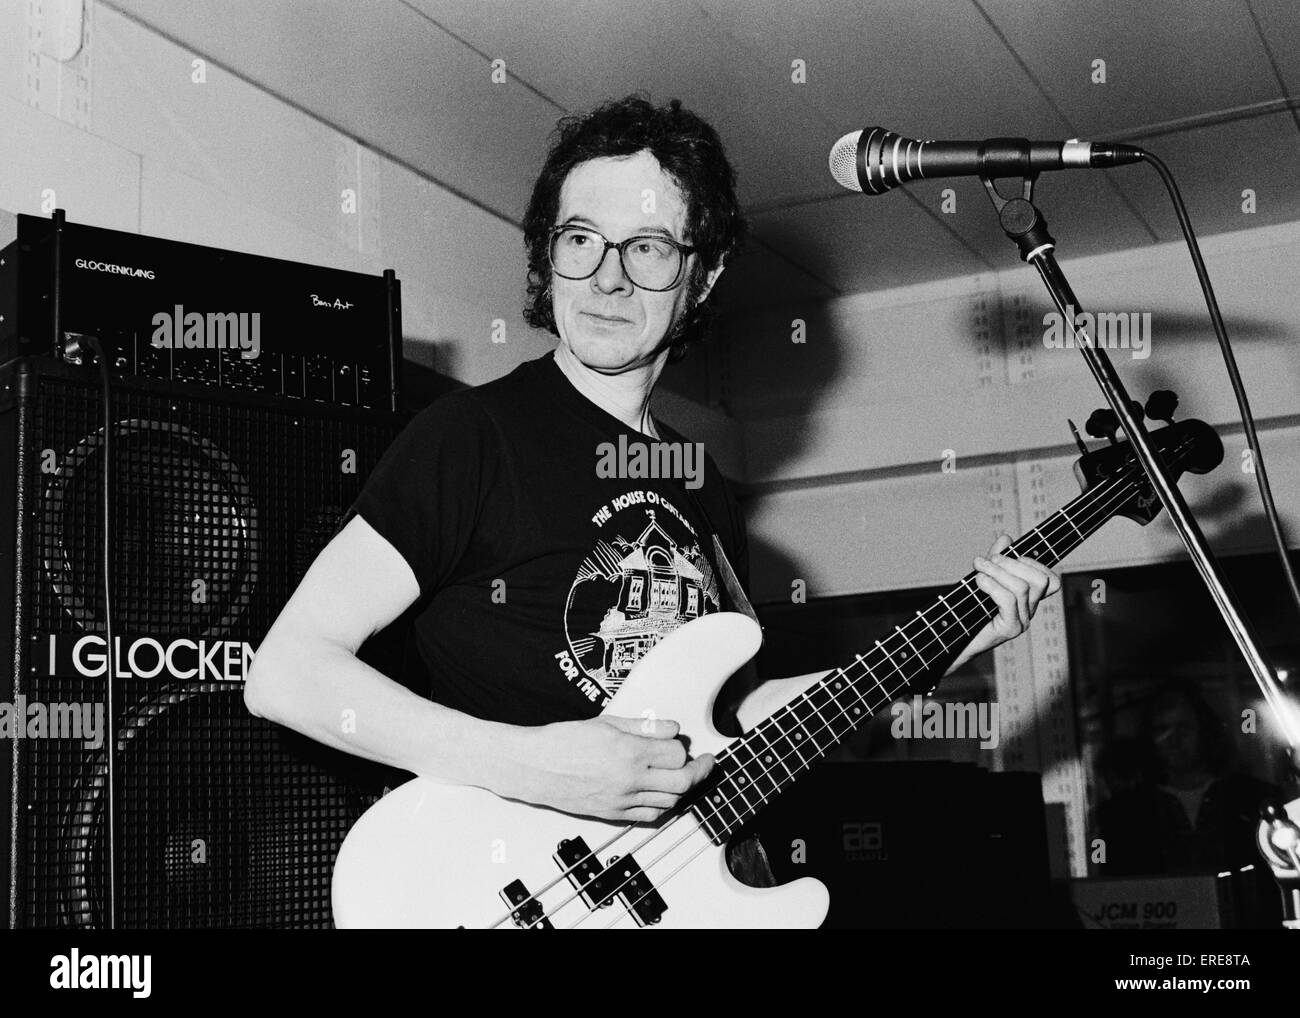 Noel Redding, member of the Jimi Hendrix Experience, during a demo at the Frankfurt Music Fair in 1991. NR: British bass player, 25 December 1945 - 11 May 2003 Stock Photo